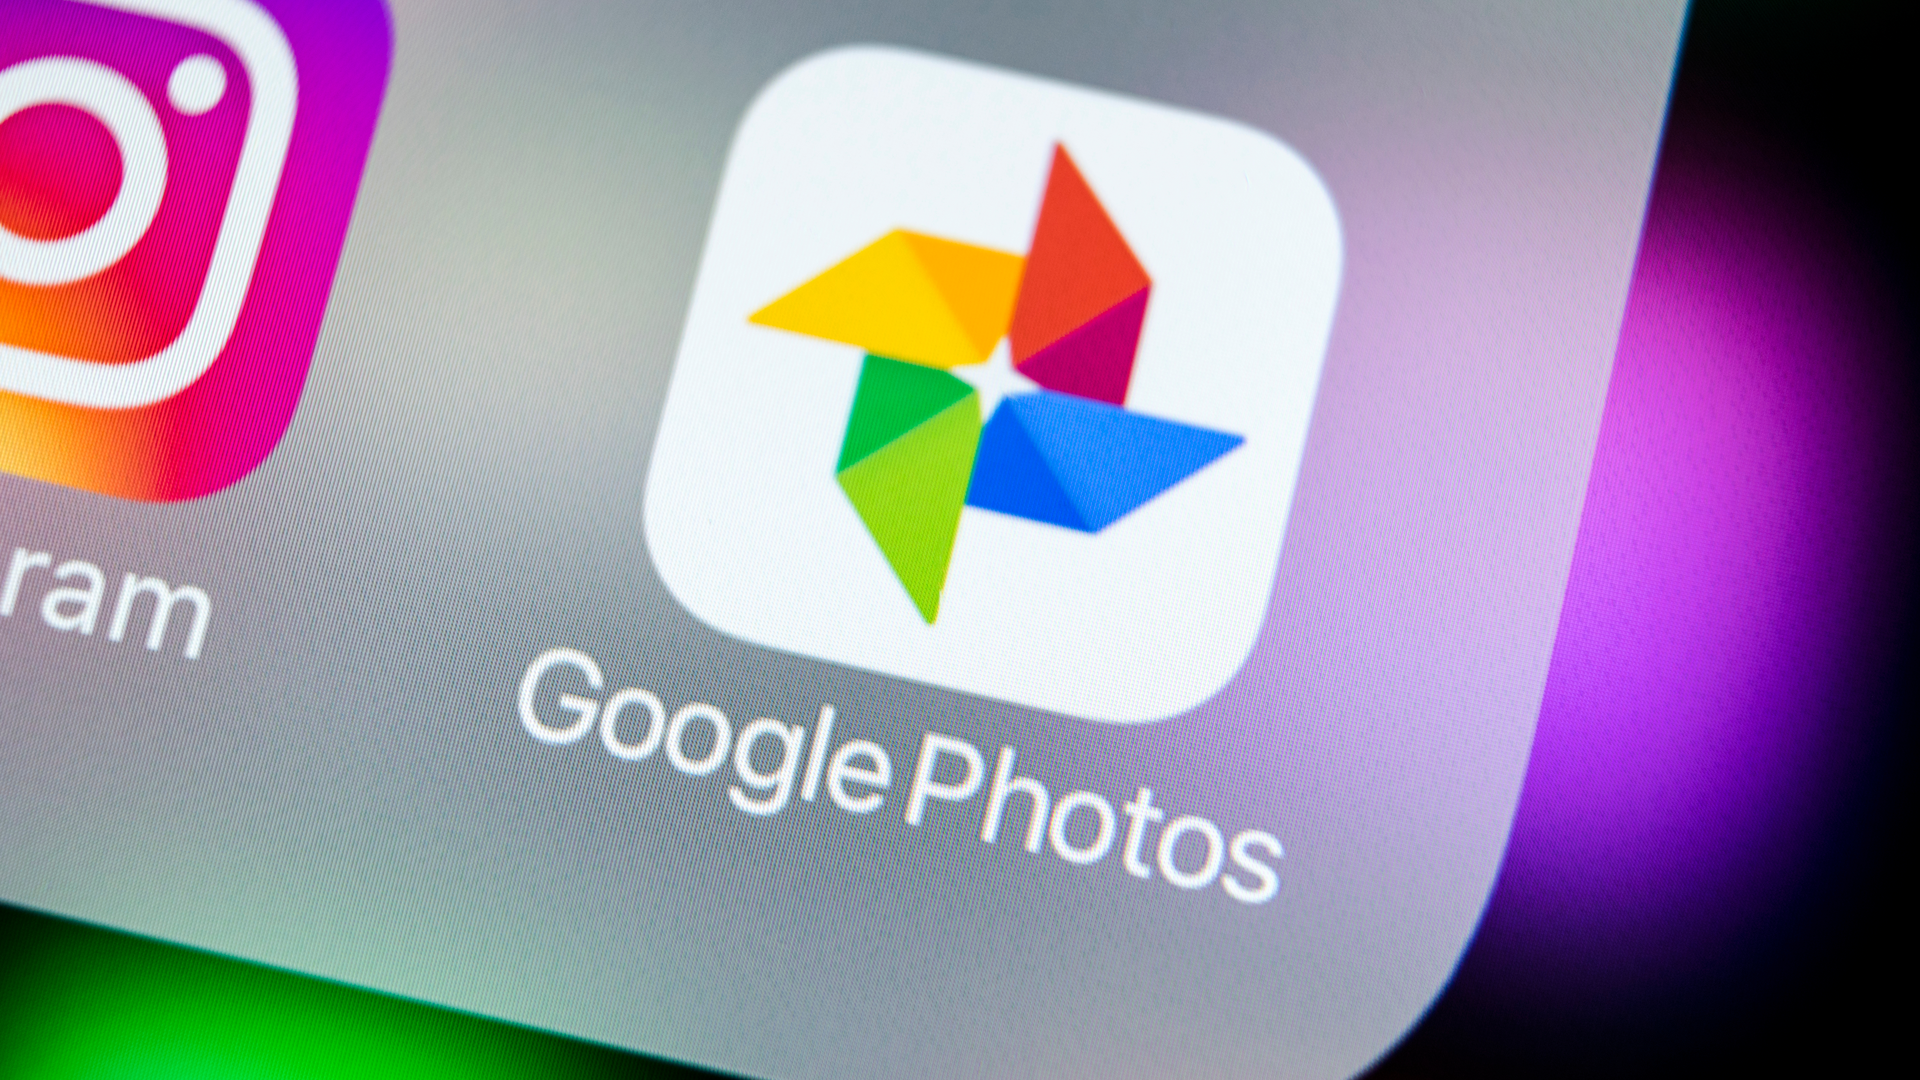 Google Photos smartphone application icon on iPhone X screen close up